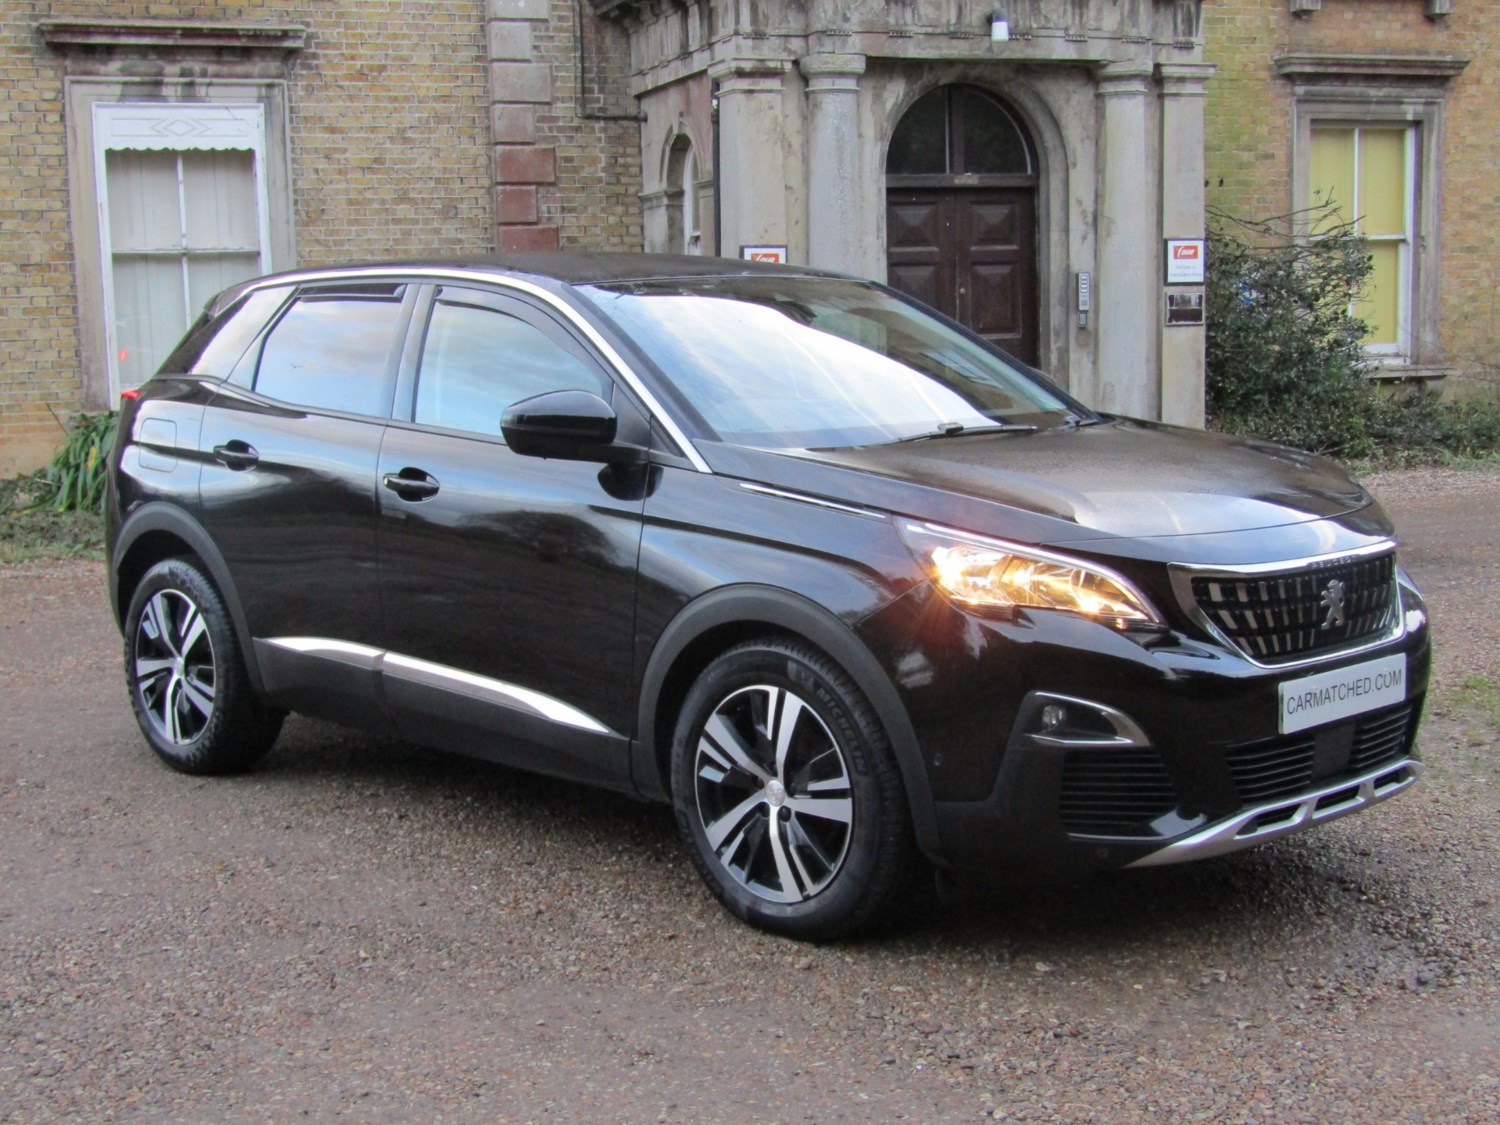 2018 (18) Peugeot 3008 1.6 BlueHDi 120 Allure 5dr For Sale In Broadstairs, Kent